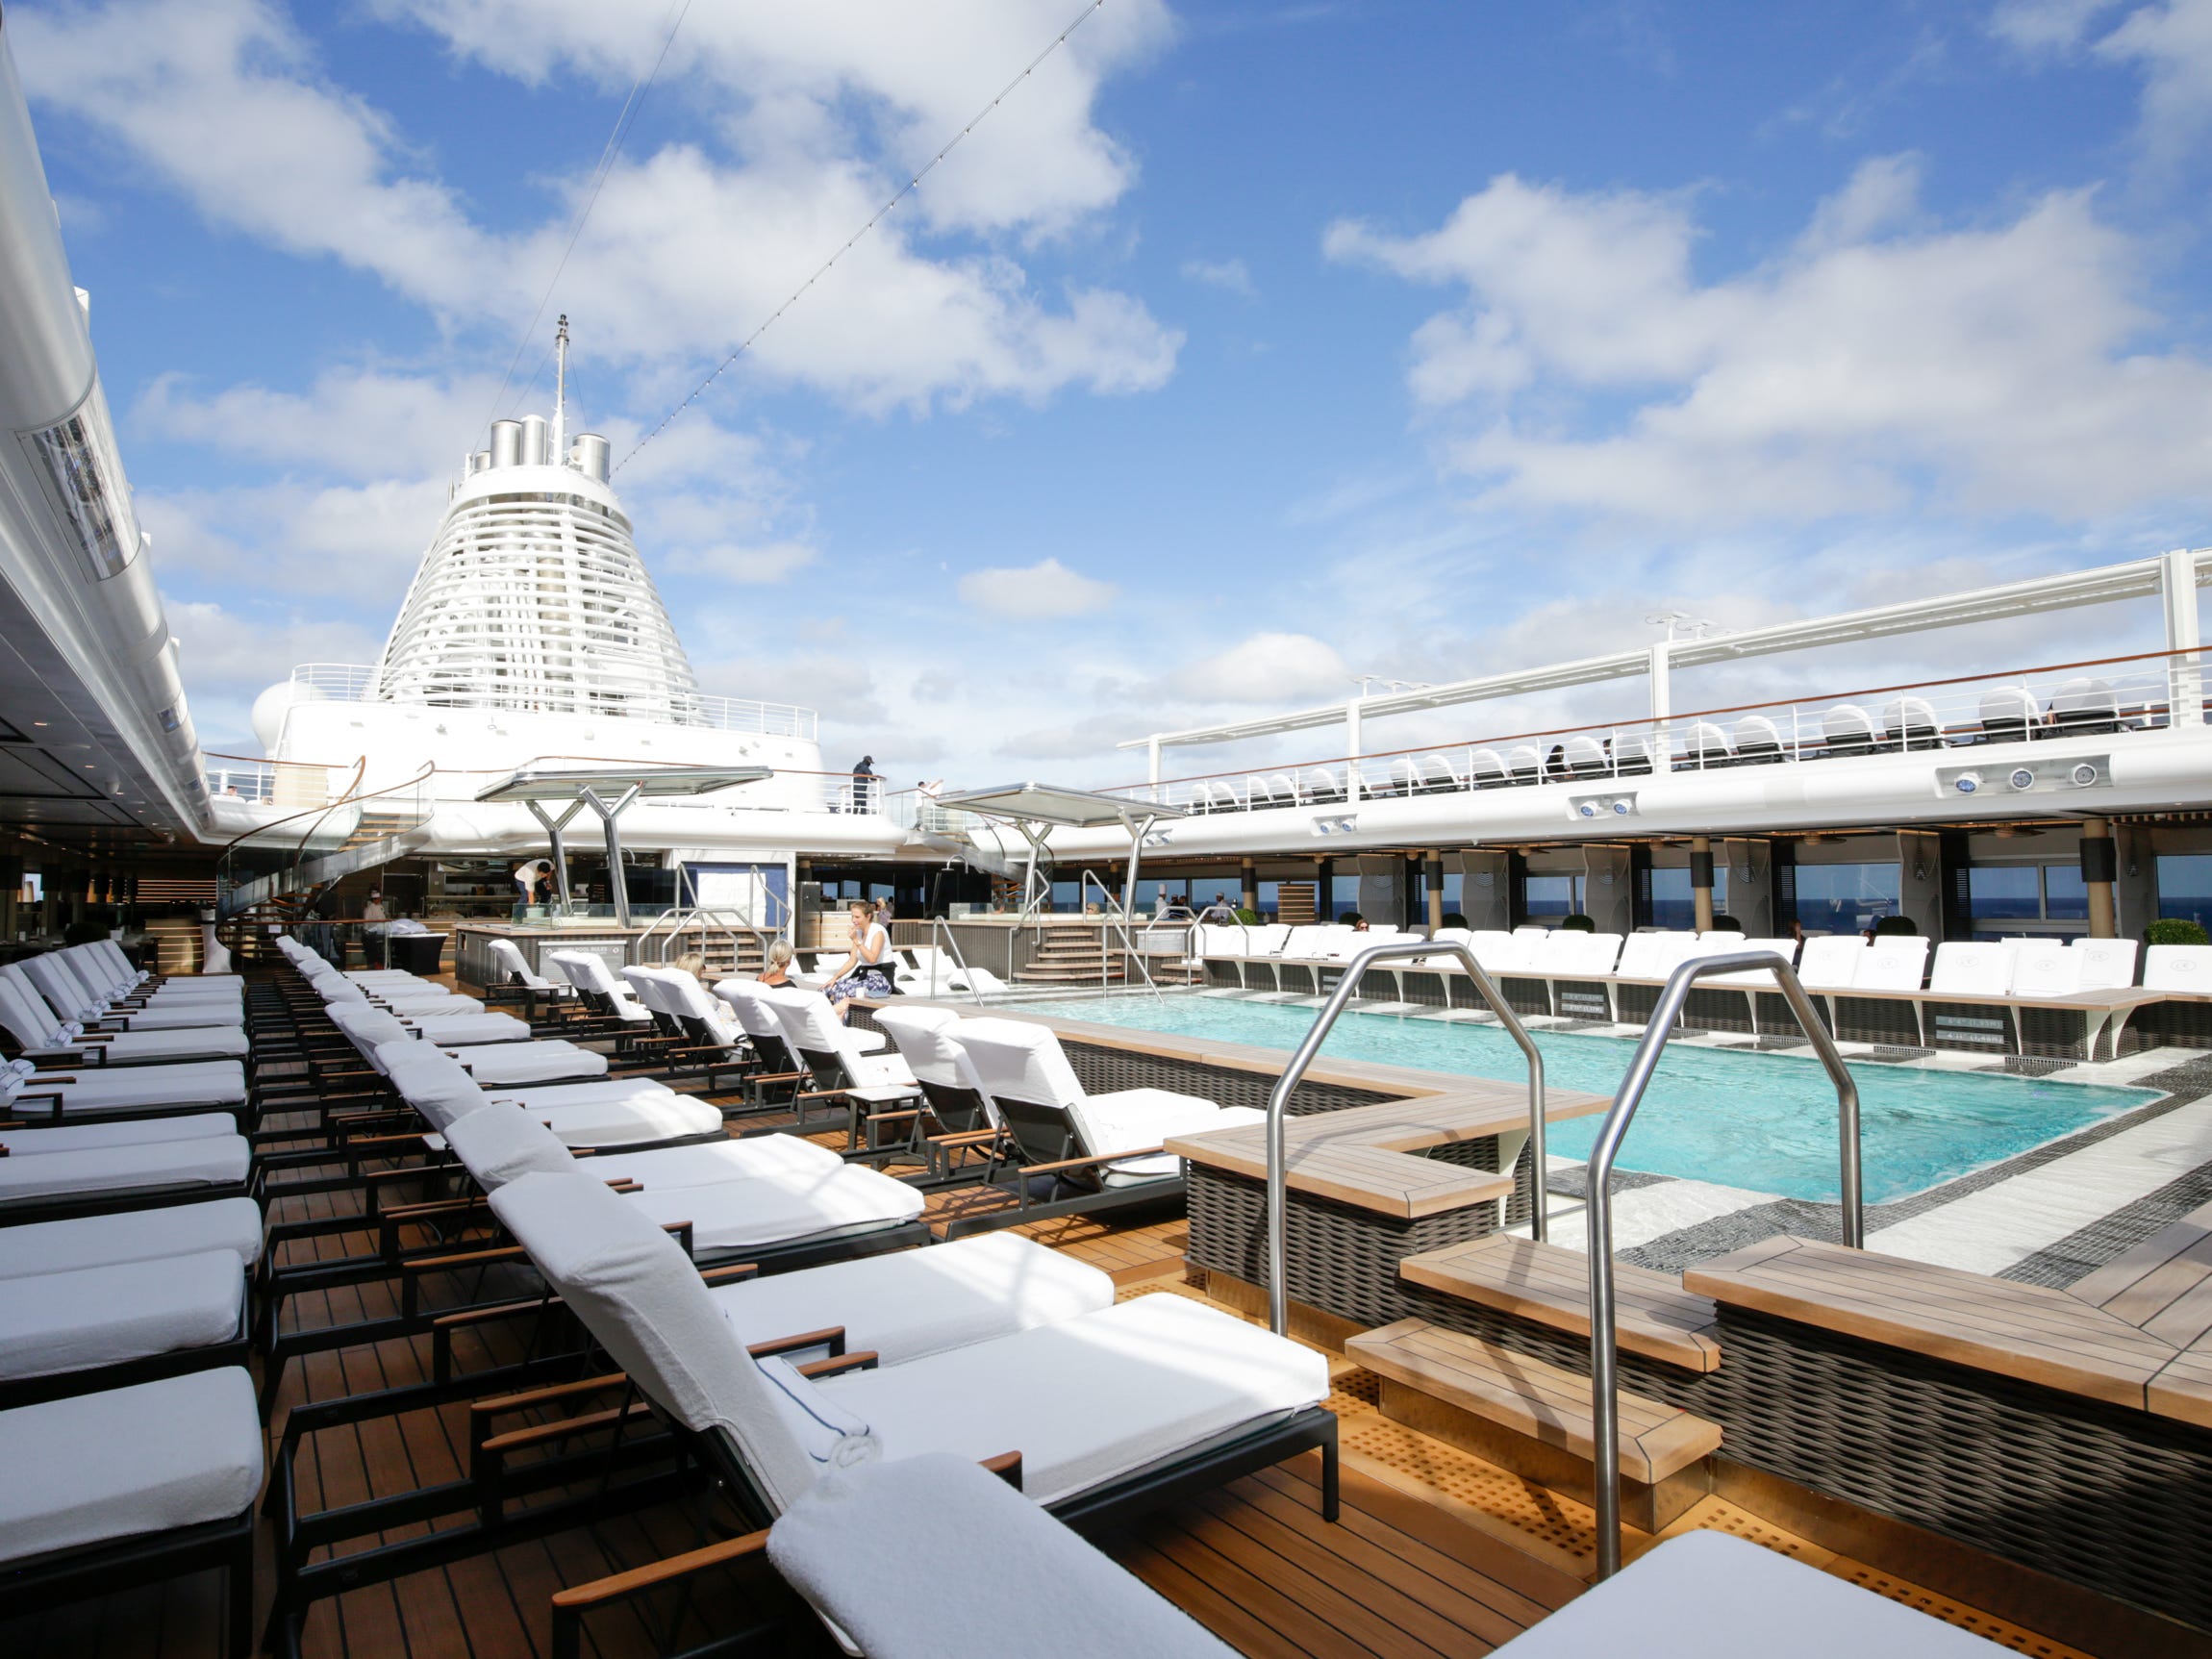 <ul class="summary-list"><li><a href="https://www.businessinsider.com/ultra-luxury-cruise-stateroom-not-favorite-regent-seven-seas-review-2023-12">Regent Seven Seas Cruises</a> recently launched a new ultra-luxury ship, the Seven Seas Grandeur.</li><li>To attract wealthy travelers, the cruise ship is filled with luxuries like caviar and a $6 million art collection.</li><li>Its 2024 itineraries, which range from $4,115 to $84,000 per person, are worth the price — if you can afford it. </li></ul><p>I vacationed how the "other half" vacations — aboard <a href="https://www.businessinsider.com/new-luxury-cruise-ship-wealthy-travelers-regent-seven-seas-grandeur-2023-12">Regent Seven Seas Cruises' newest ship, the ultra-luxury Grandeur</a>.</p><p>Unfortunately, I loved it.</p><p>After three nights aboard the $525.4 million vessel during its non-revenue "christening" sailing, I now understand why <a href="https://www.businessinsider.com/luxury-cruise-line-regent-its-longest-world-cruise-yet-2023-3">wealthy travelers are shelling out</a> over $4,000 for one week on the floating resort.</p><div class="read-original">Read the original article on <a href="https://www.businessinsider.com/review-ultra-luxury-cruise-wealthy-travelers-regent-seven-seas-2023-12">Business Insider</a></div>